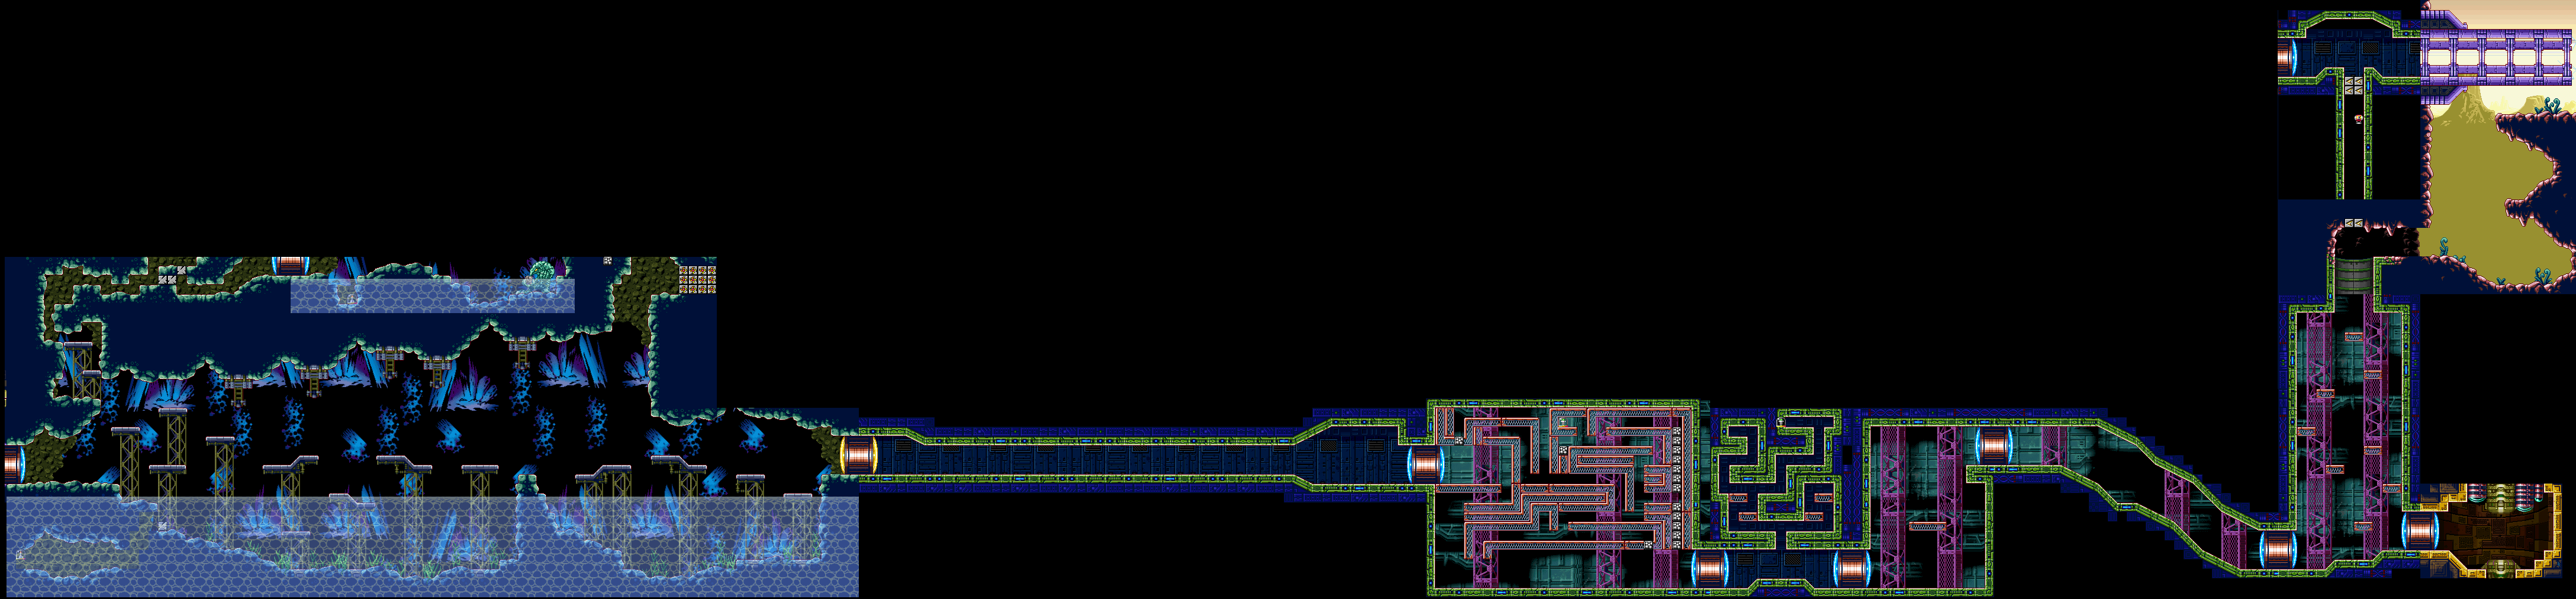 Super Metroid Wrecked Ship Map - Maping Resources.